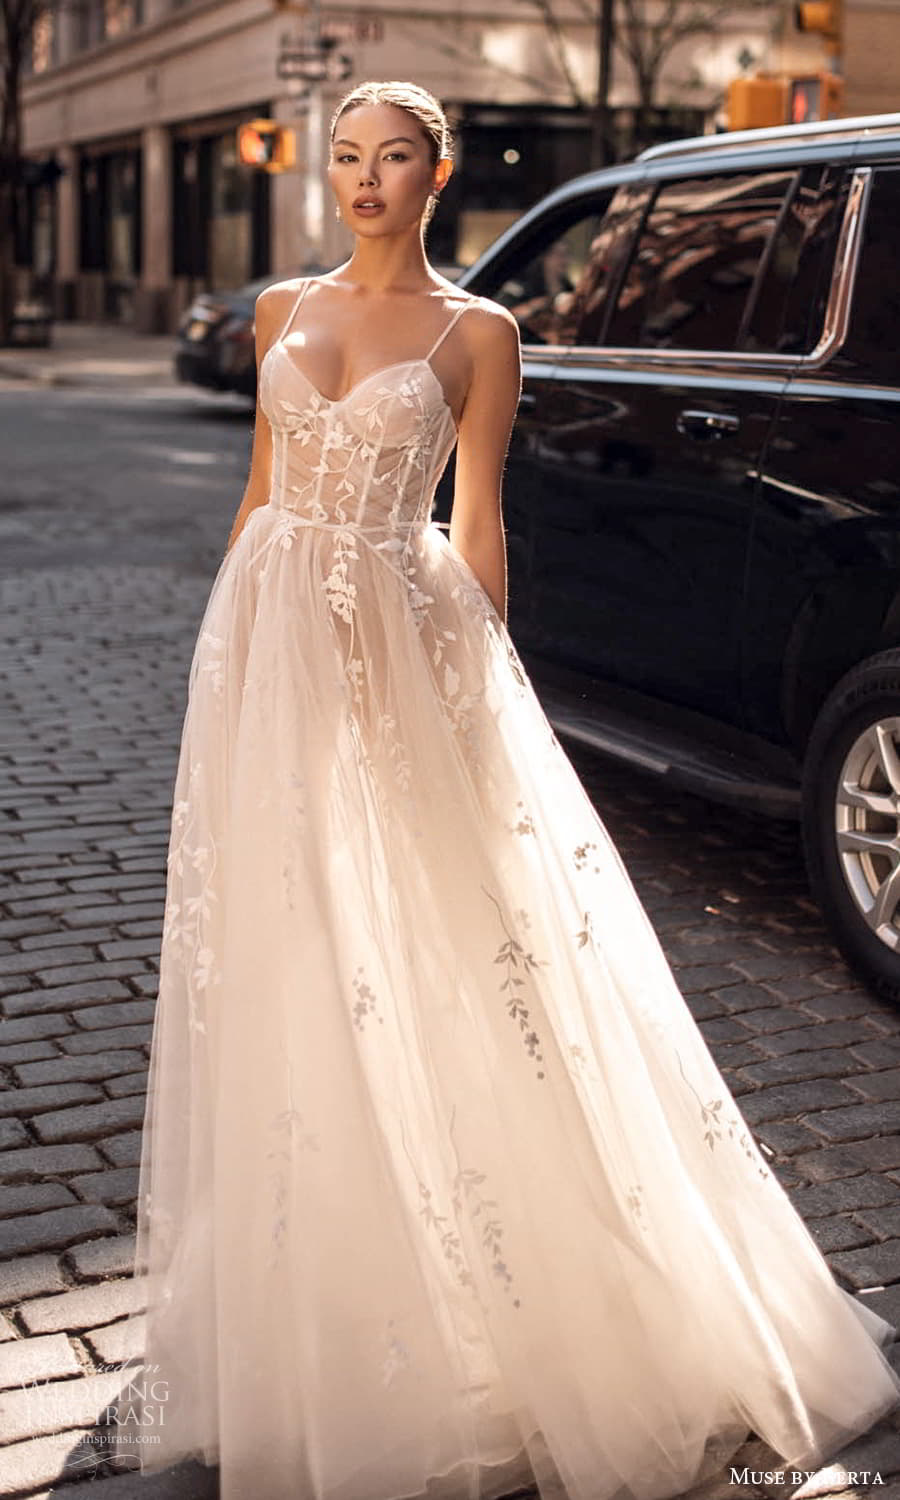 Belle & Tulle Bridal - The new Muse Spring 2022 Wedding Collection